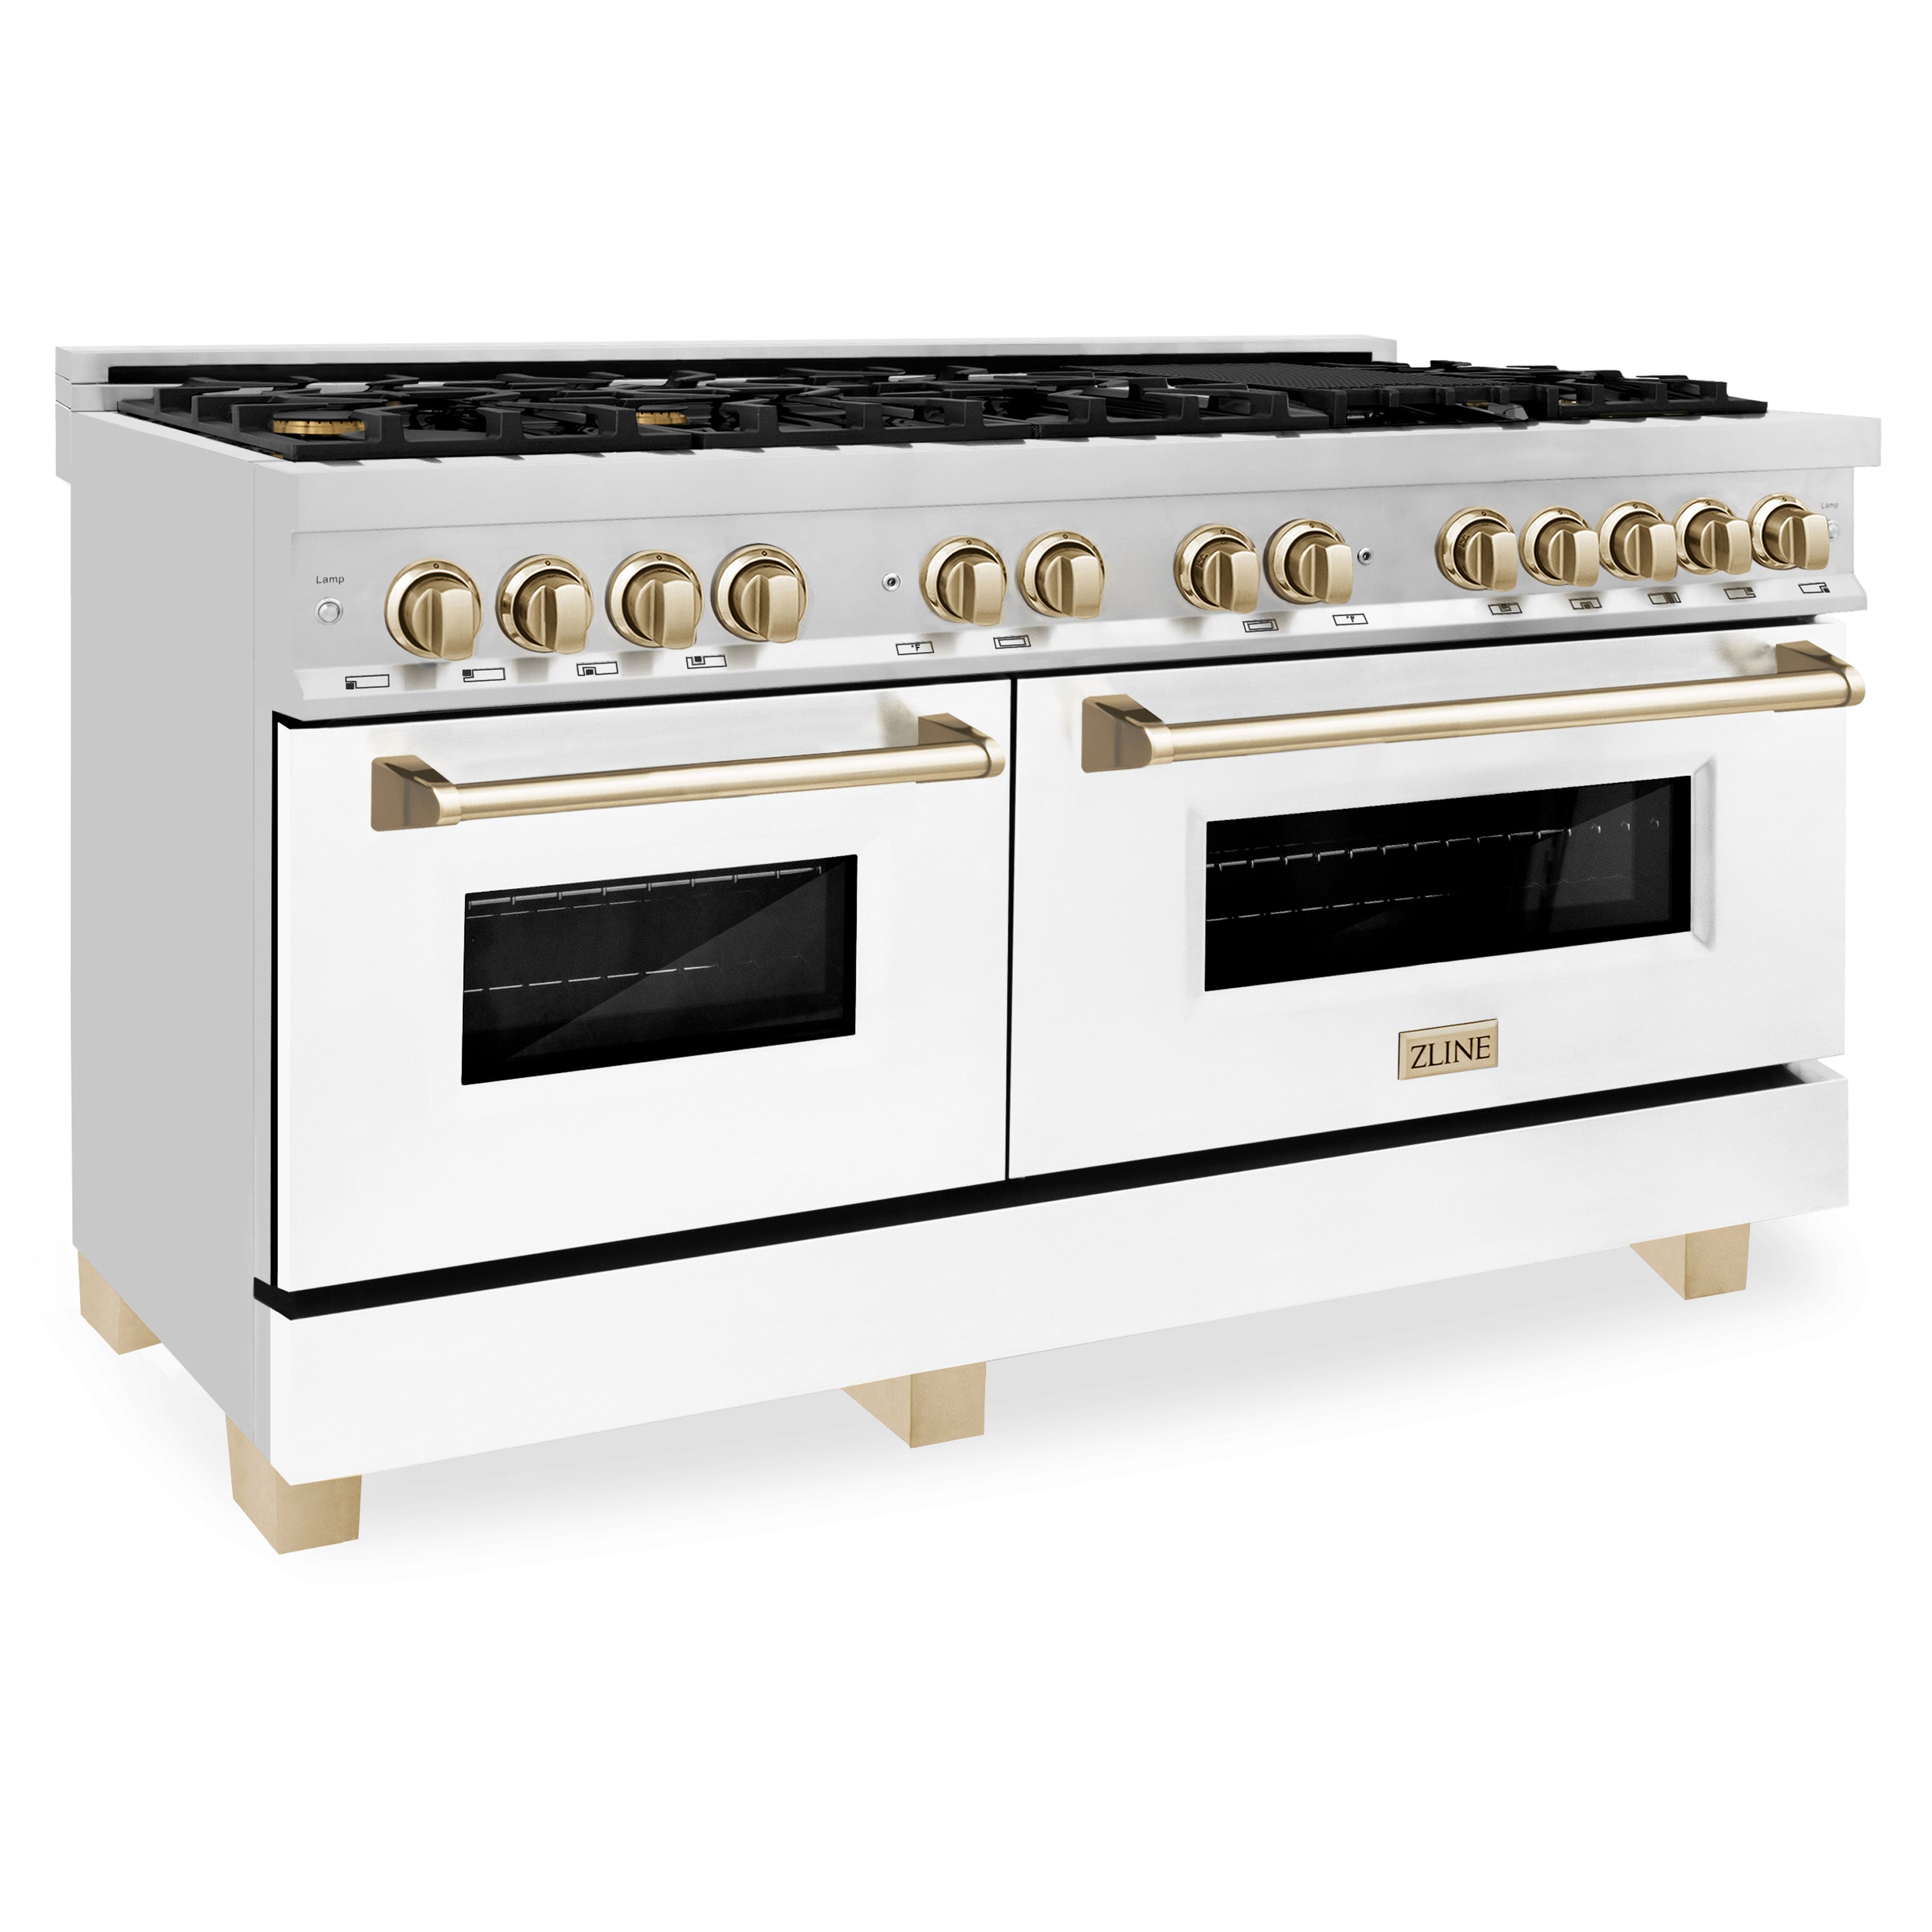 ZLINE Autograph Edition 60" 7.4 cu. ft. Dual Fuel Range with Gas Stove and Electric Oven in Stainless Steel with White Matte Door and Gold Accents (RAZ-WM-60-G)